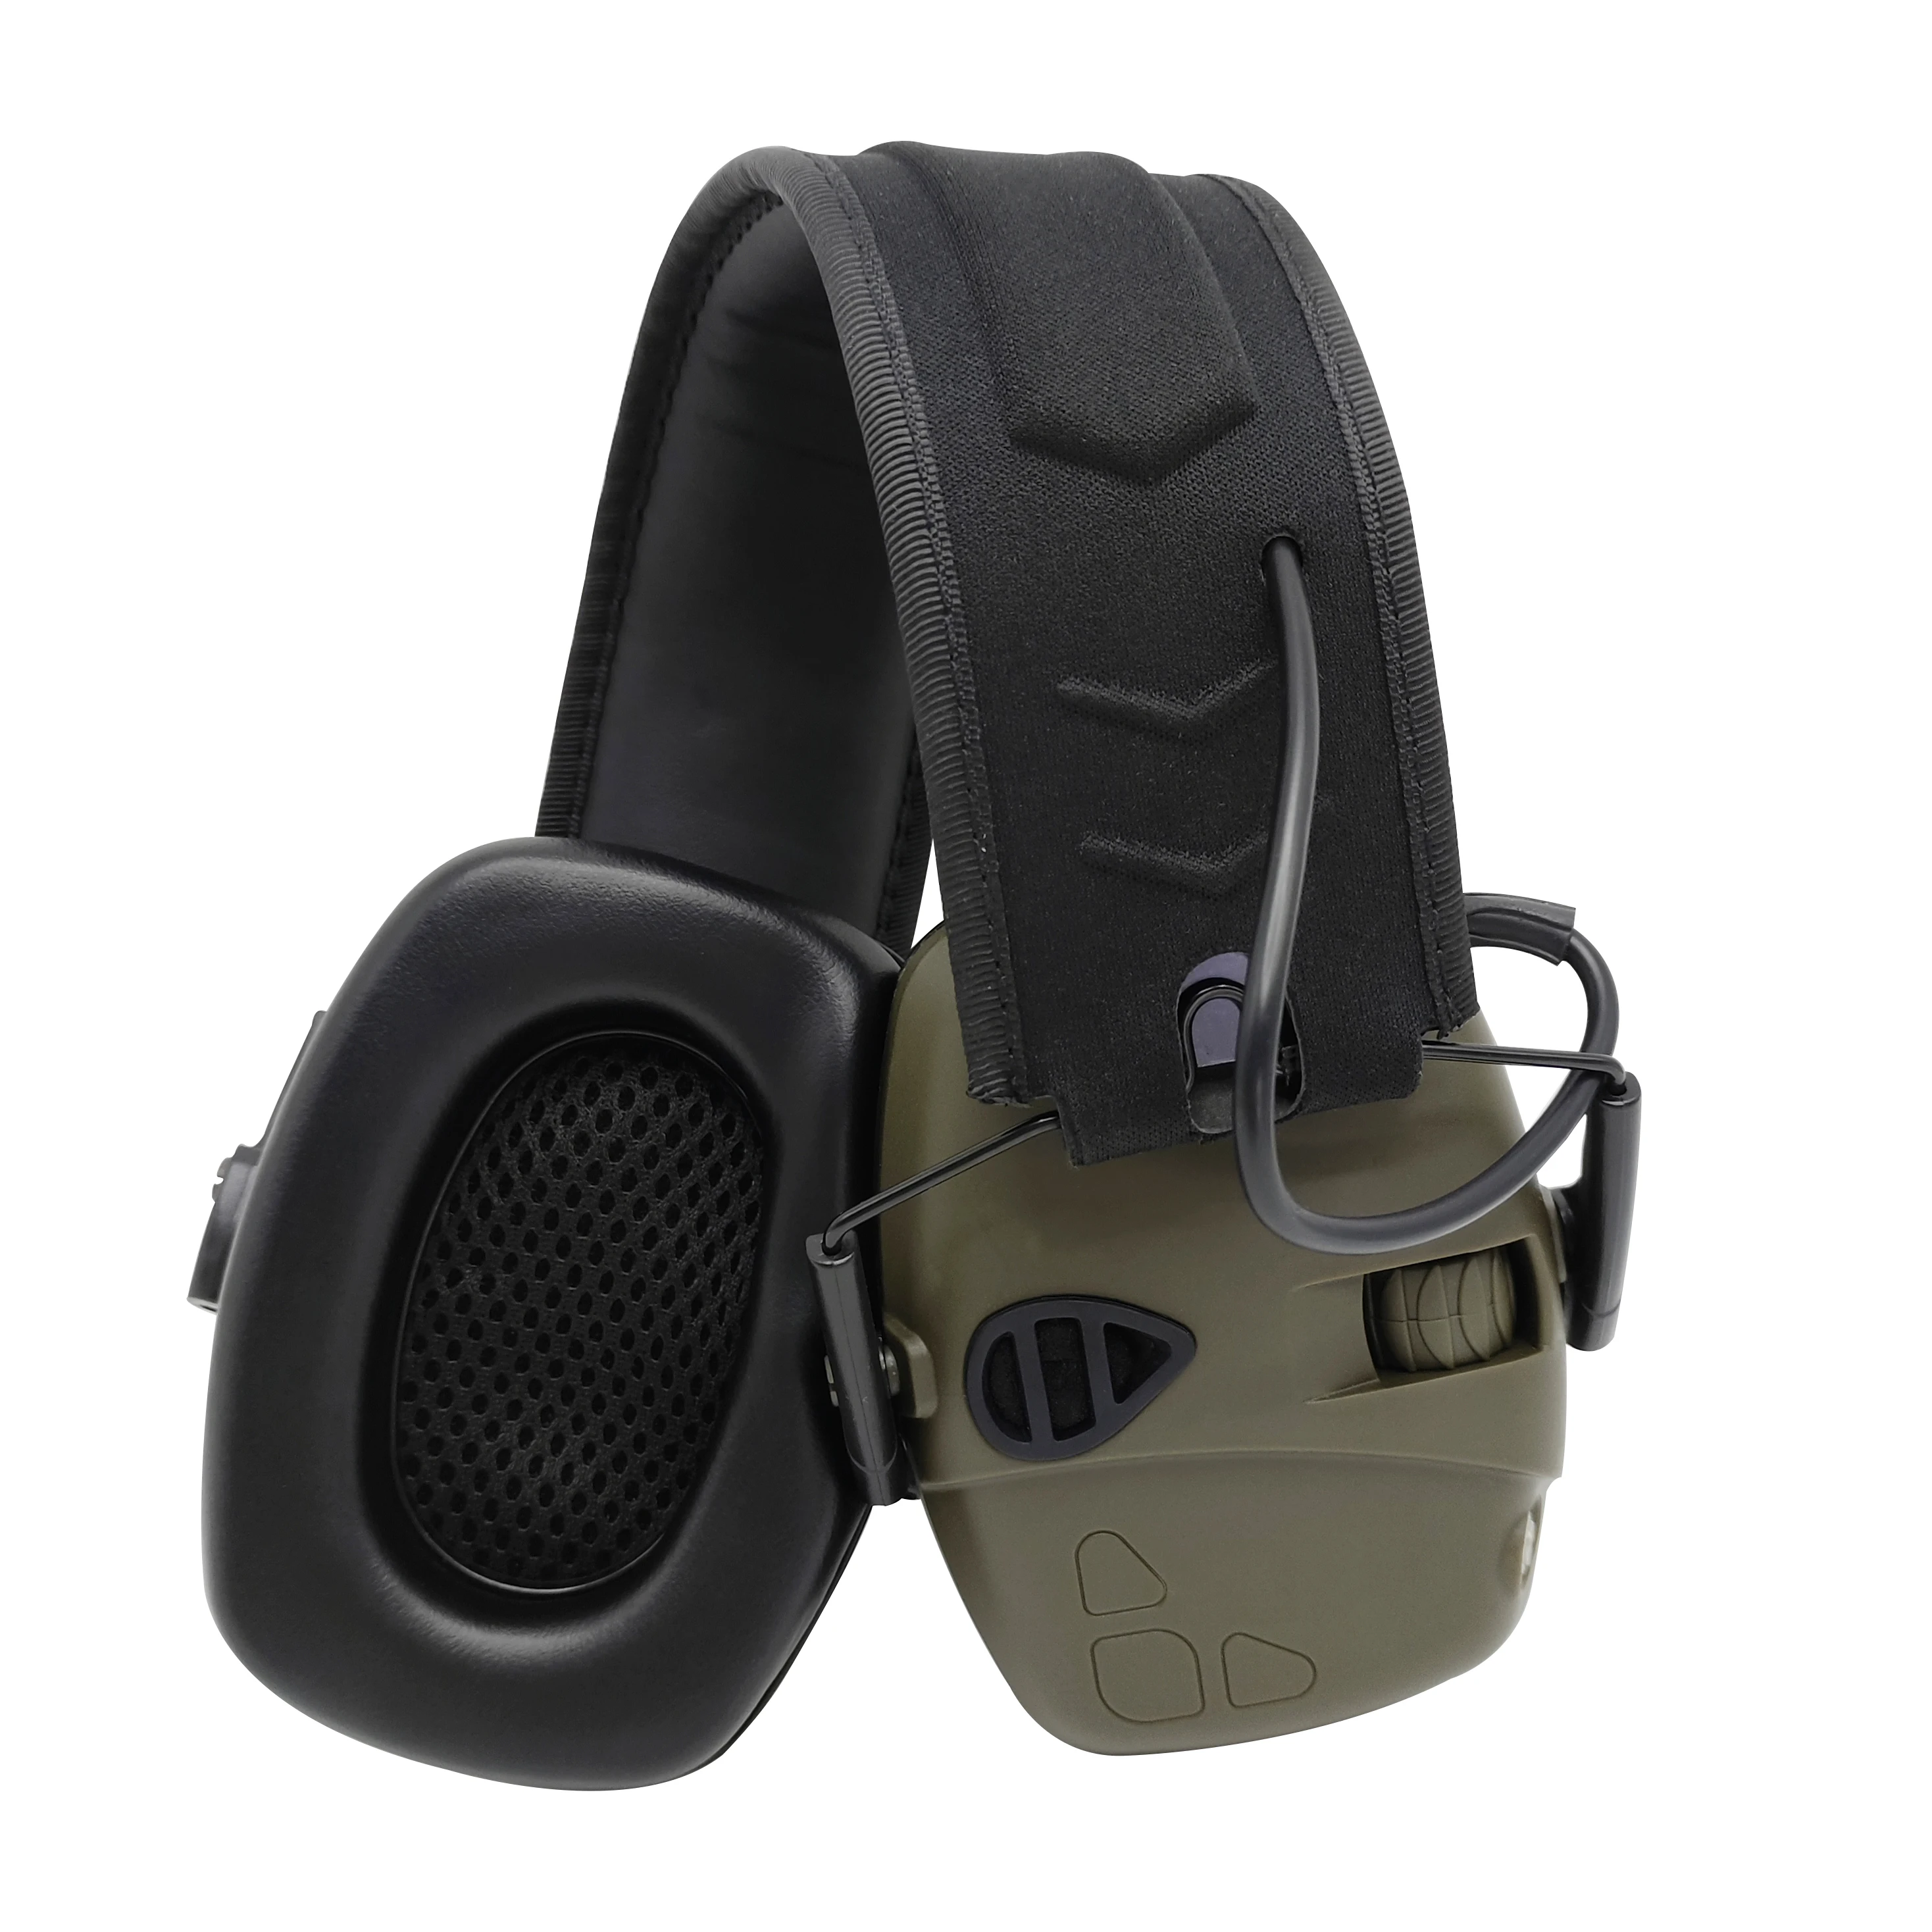 

Ear Protection Safety Earmuffs for Shooting NRR 26dB Noise Reduction Slim Passive Hearing Protector